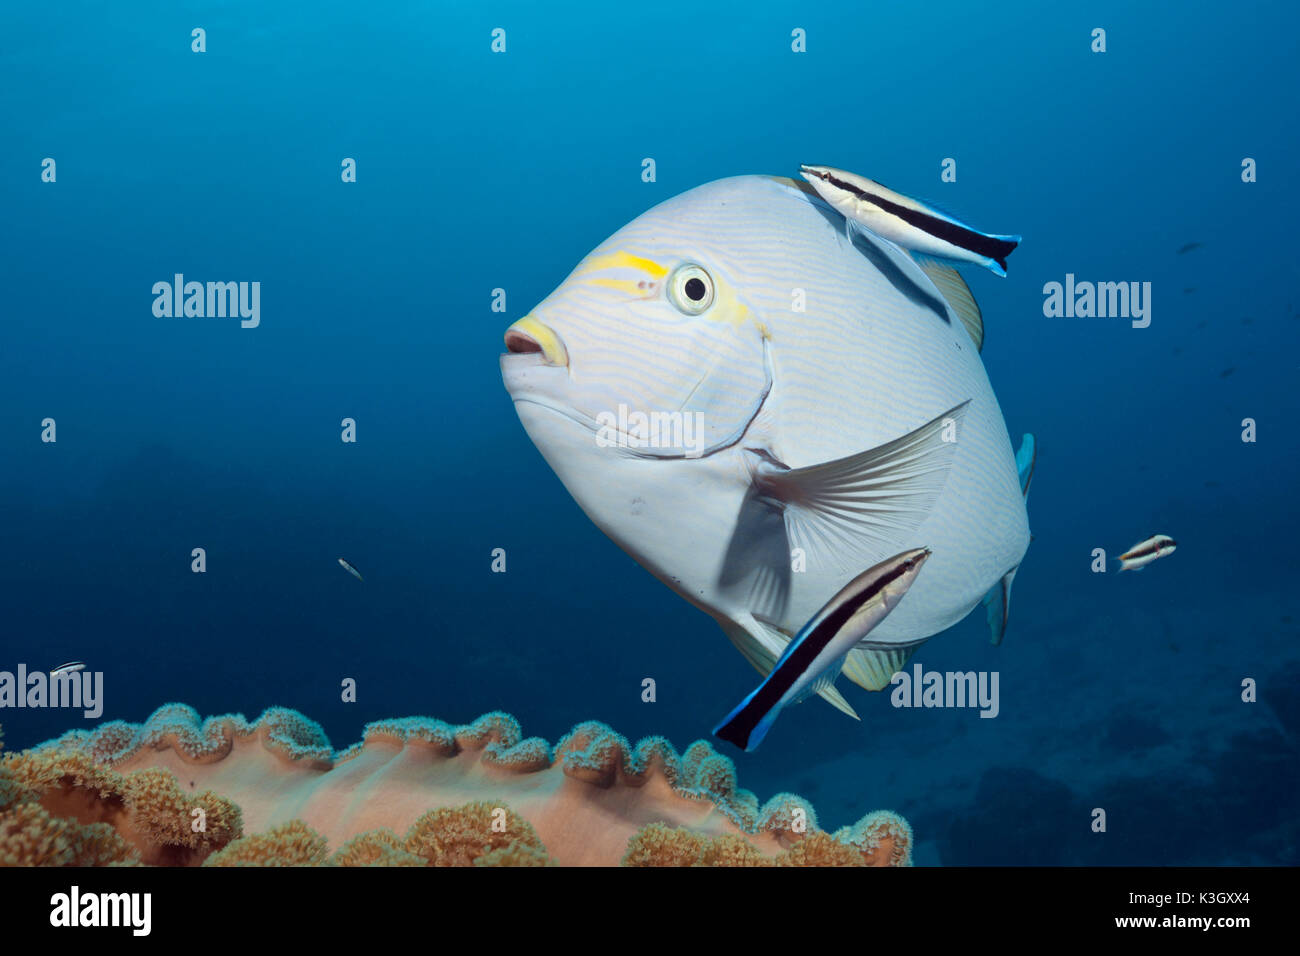 Elongate Surgeonfish cleaned by Cleaner Wrasse, Acanthurus mata, Great Barrier Reef, Australia Stock Photo